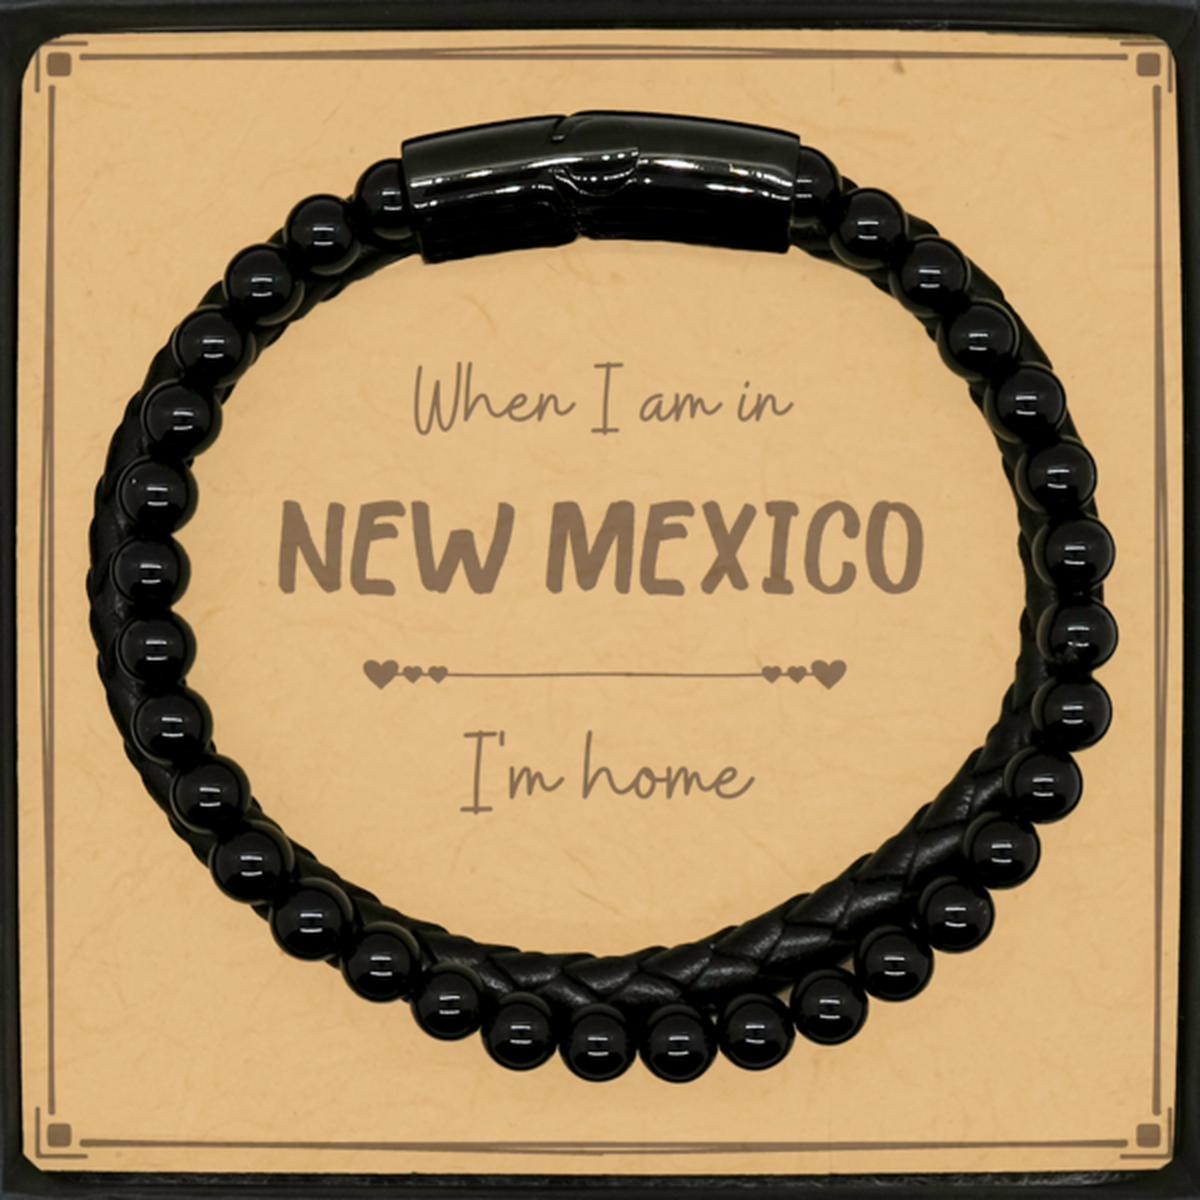 When I am in New Mexico I'm home Stone Leather Bracelets, Message Card Gifts For New Mexico, State New Mexico Birthday Gifts for Friends Coworker